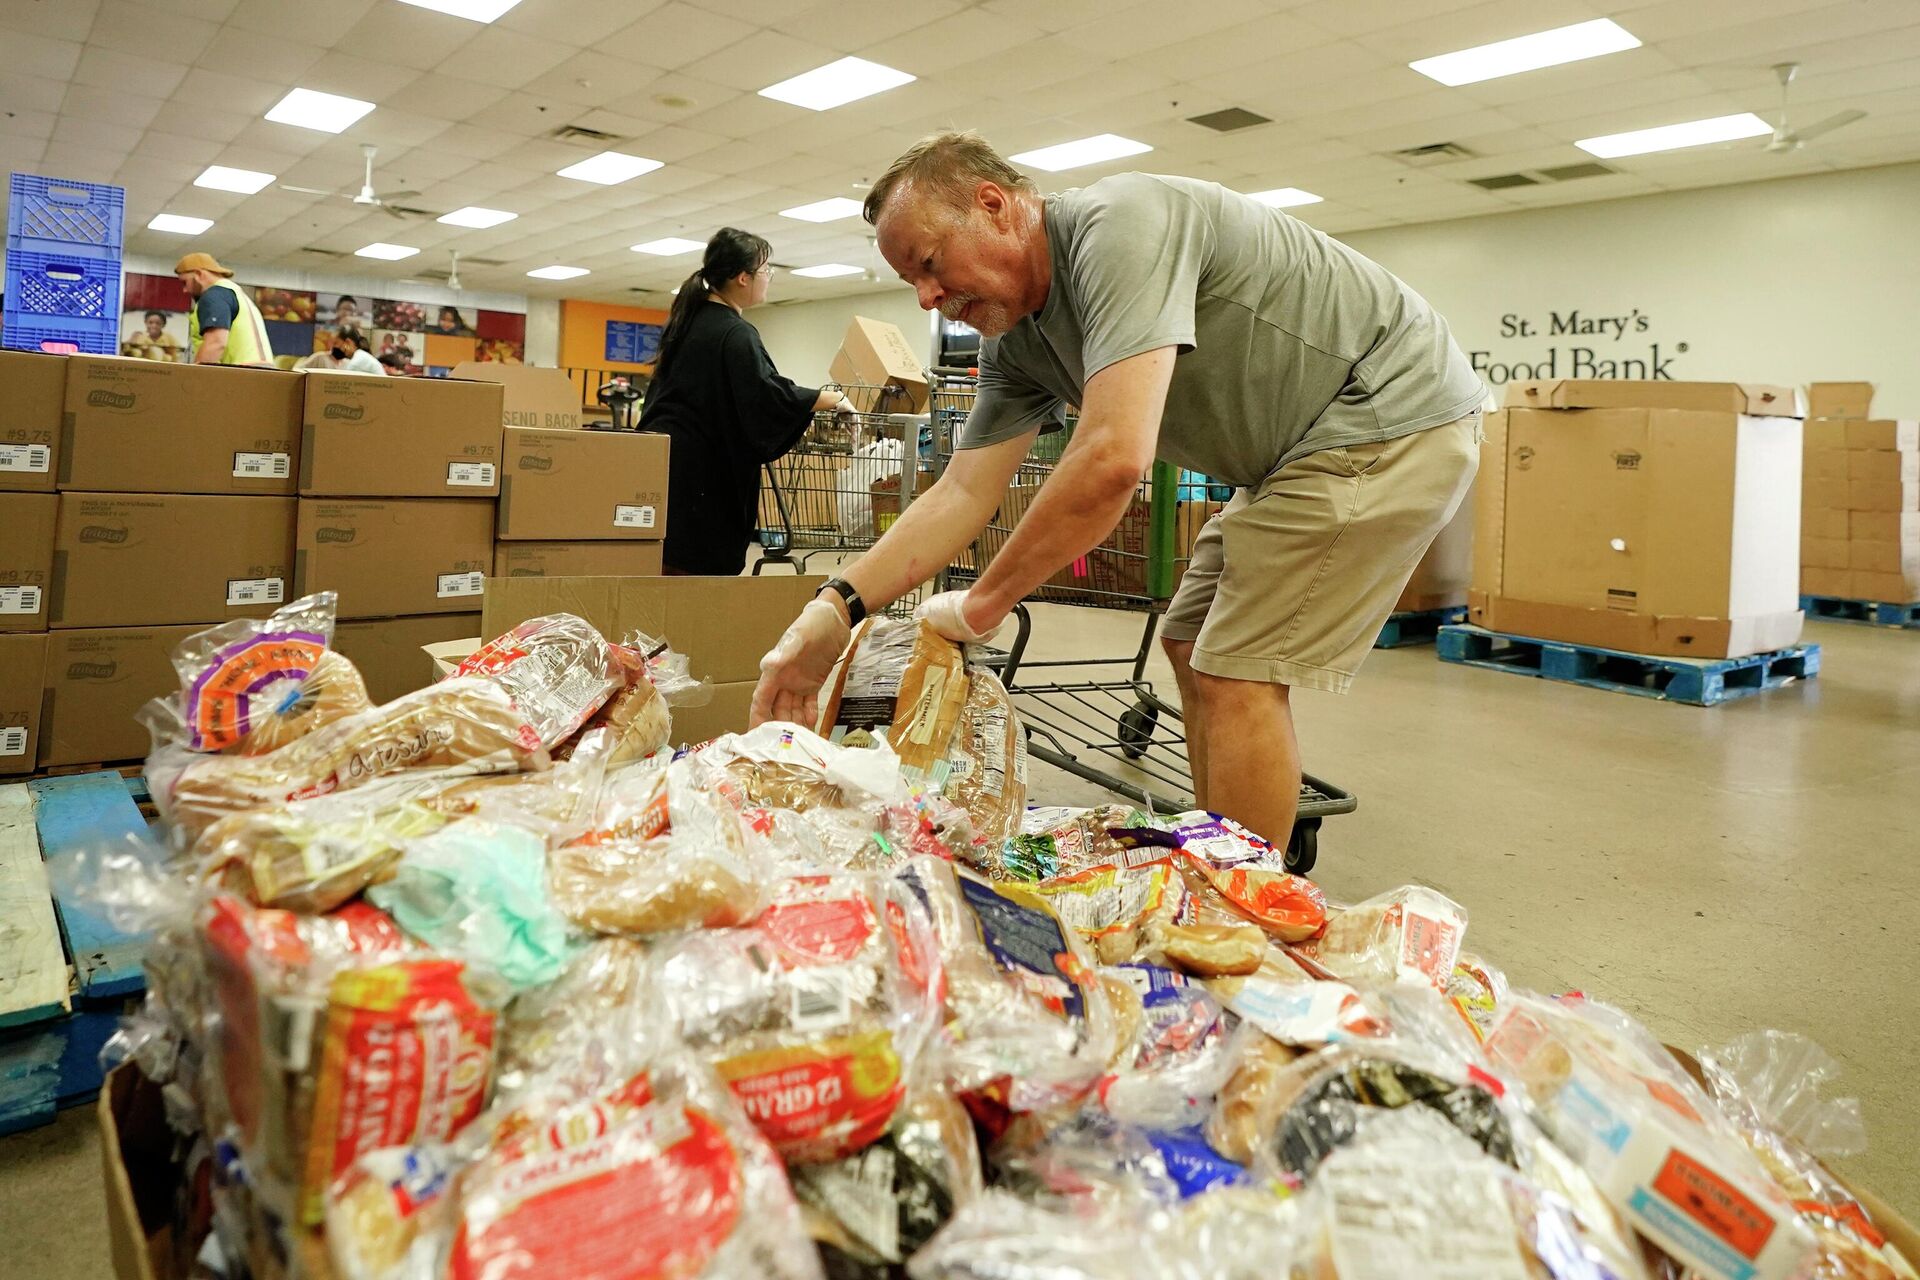 Volunteers fill up grocery carts with food for distribution into drive through vehicles at the St. Mary's Food Bank Wednesday, June 29, 2022, in Phoenix - Sputnik International, 1920, 21.10.2022